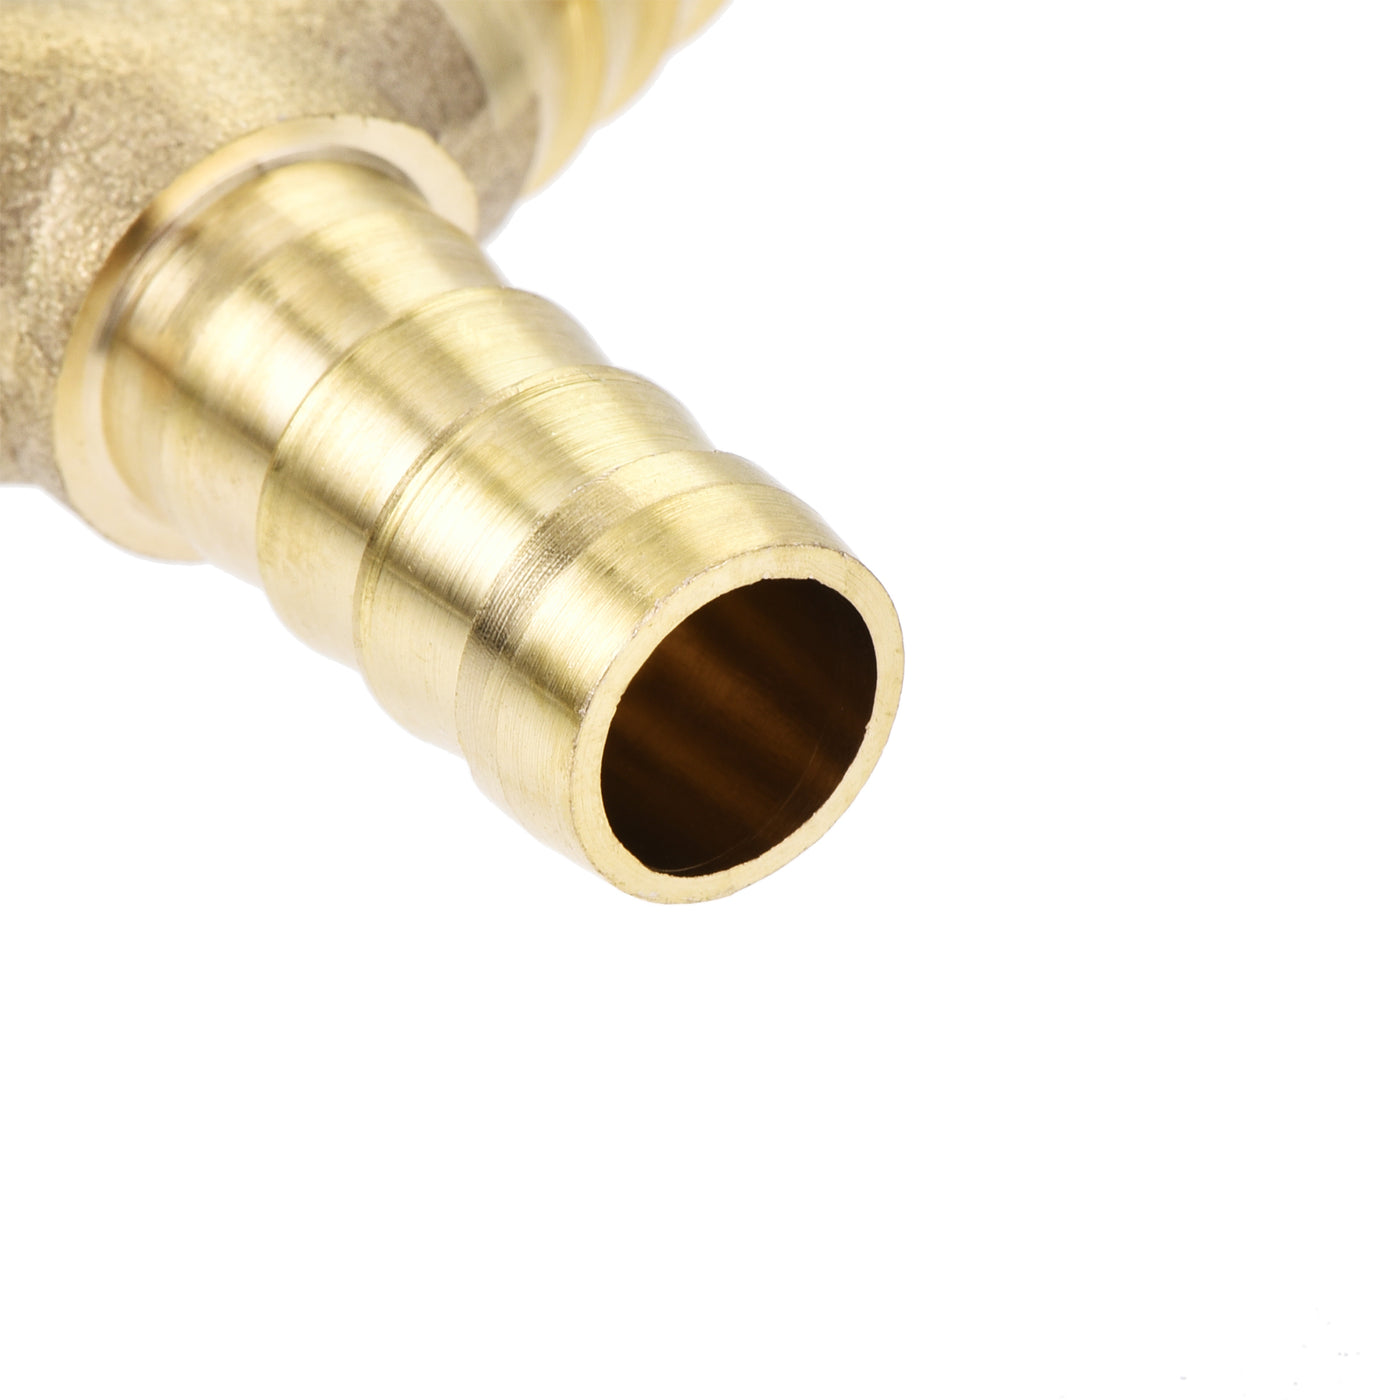 Uxcell Uxcell Reducing Barb Hose Fitting Y Shape Pipe Connector Brass 1/2" x 3/8" x 3/8" 2Pcs